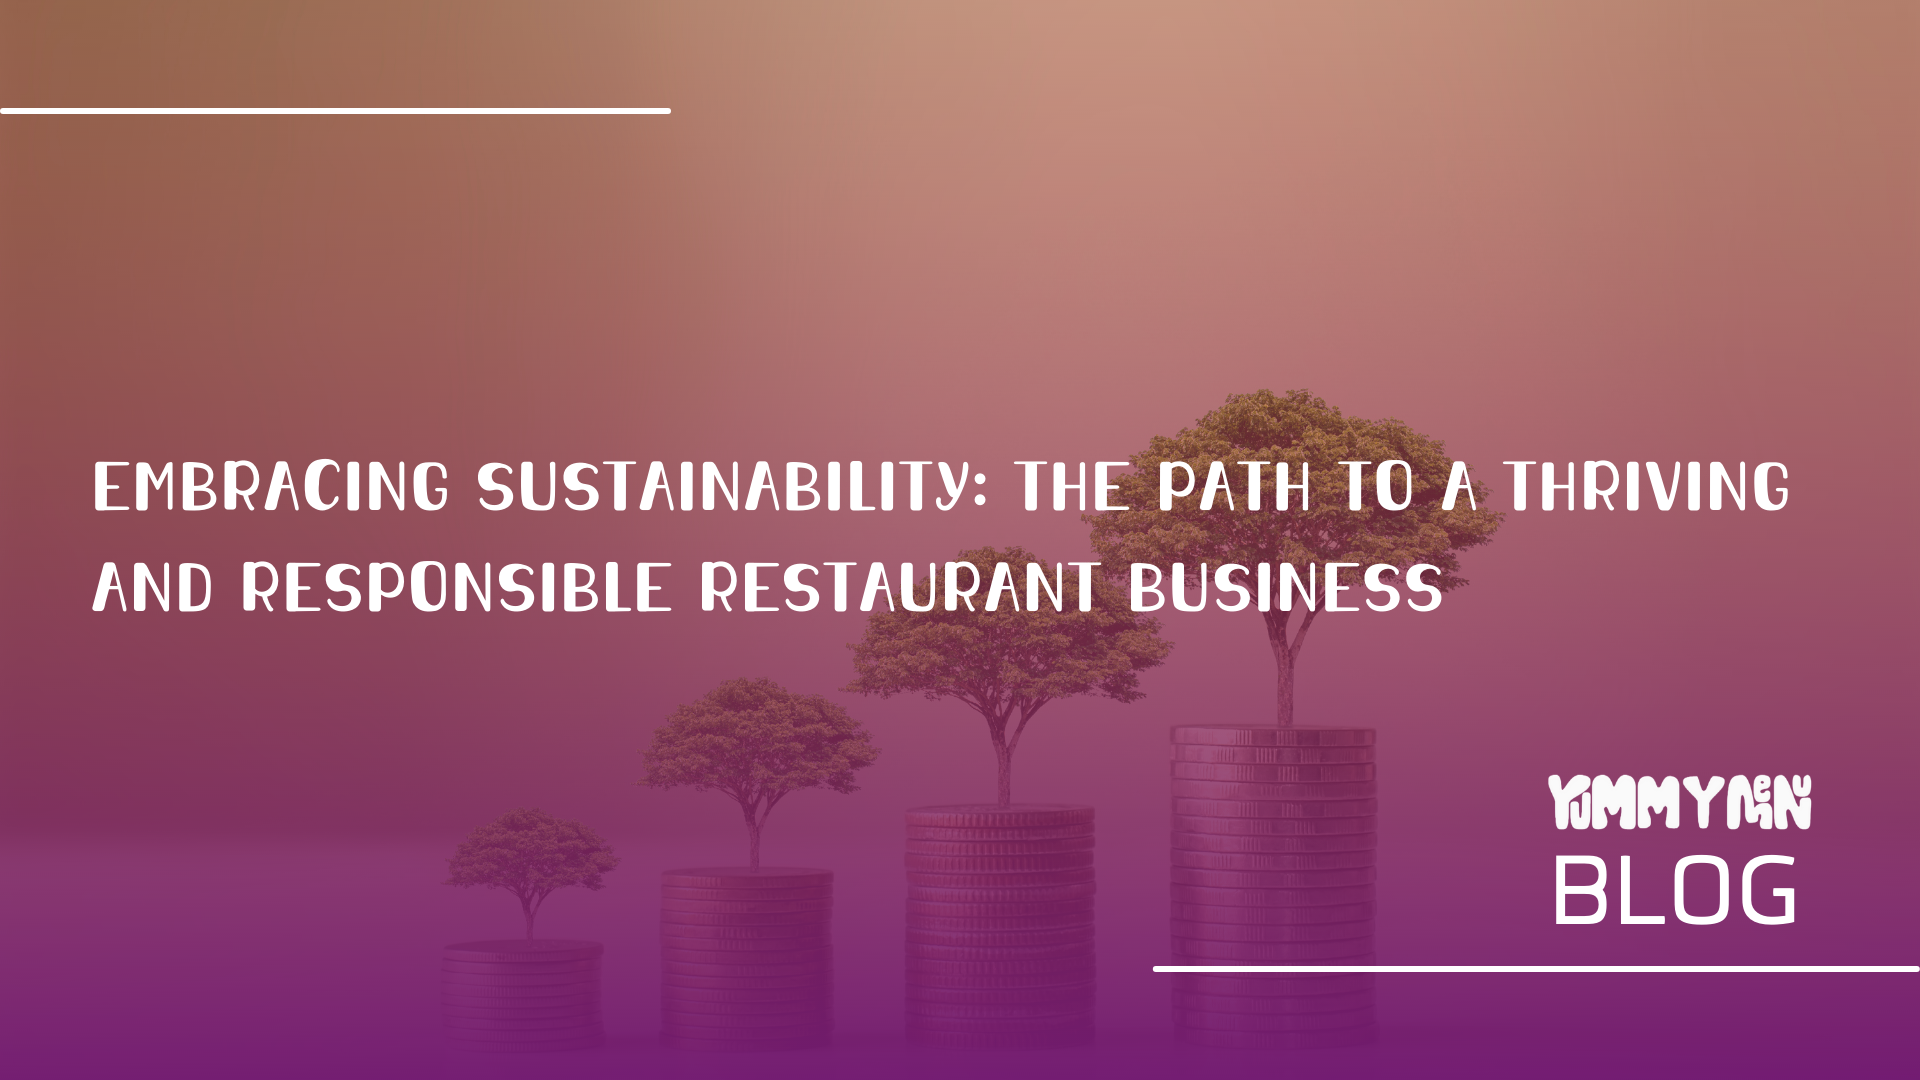 Embracing Sustainability: The Path to a Thriving and Responsible Restaurant Business